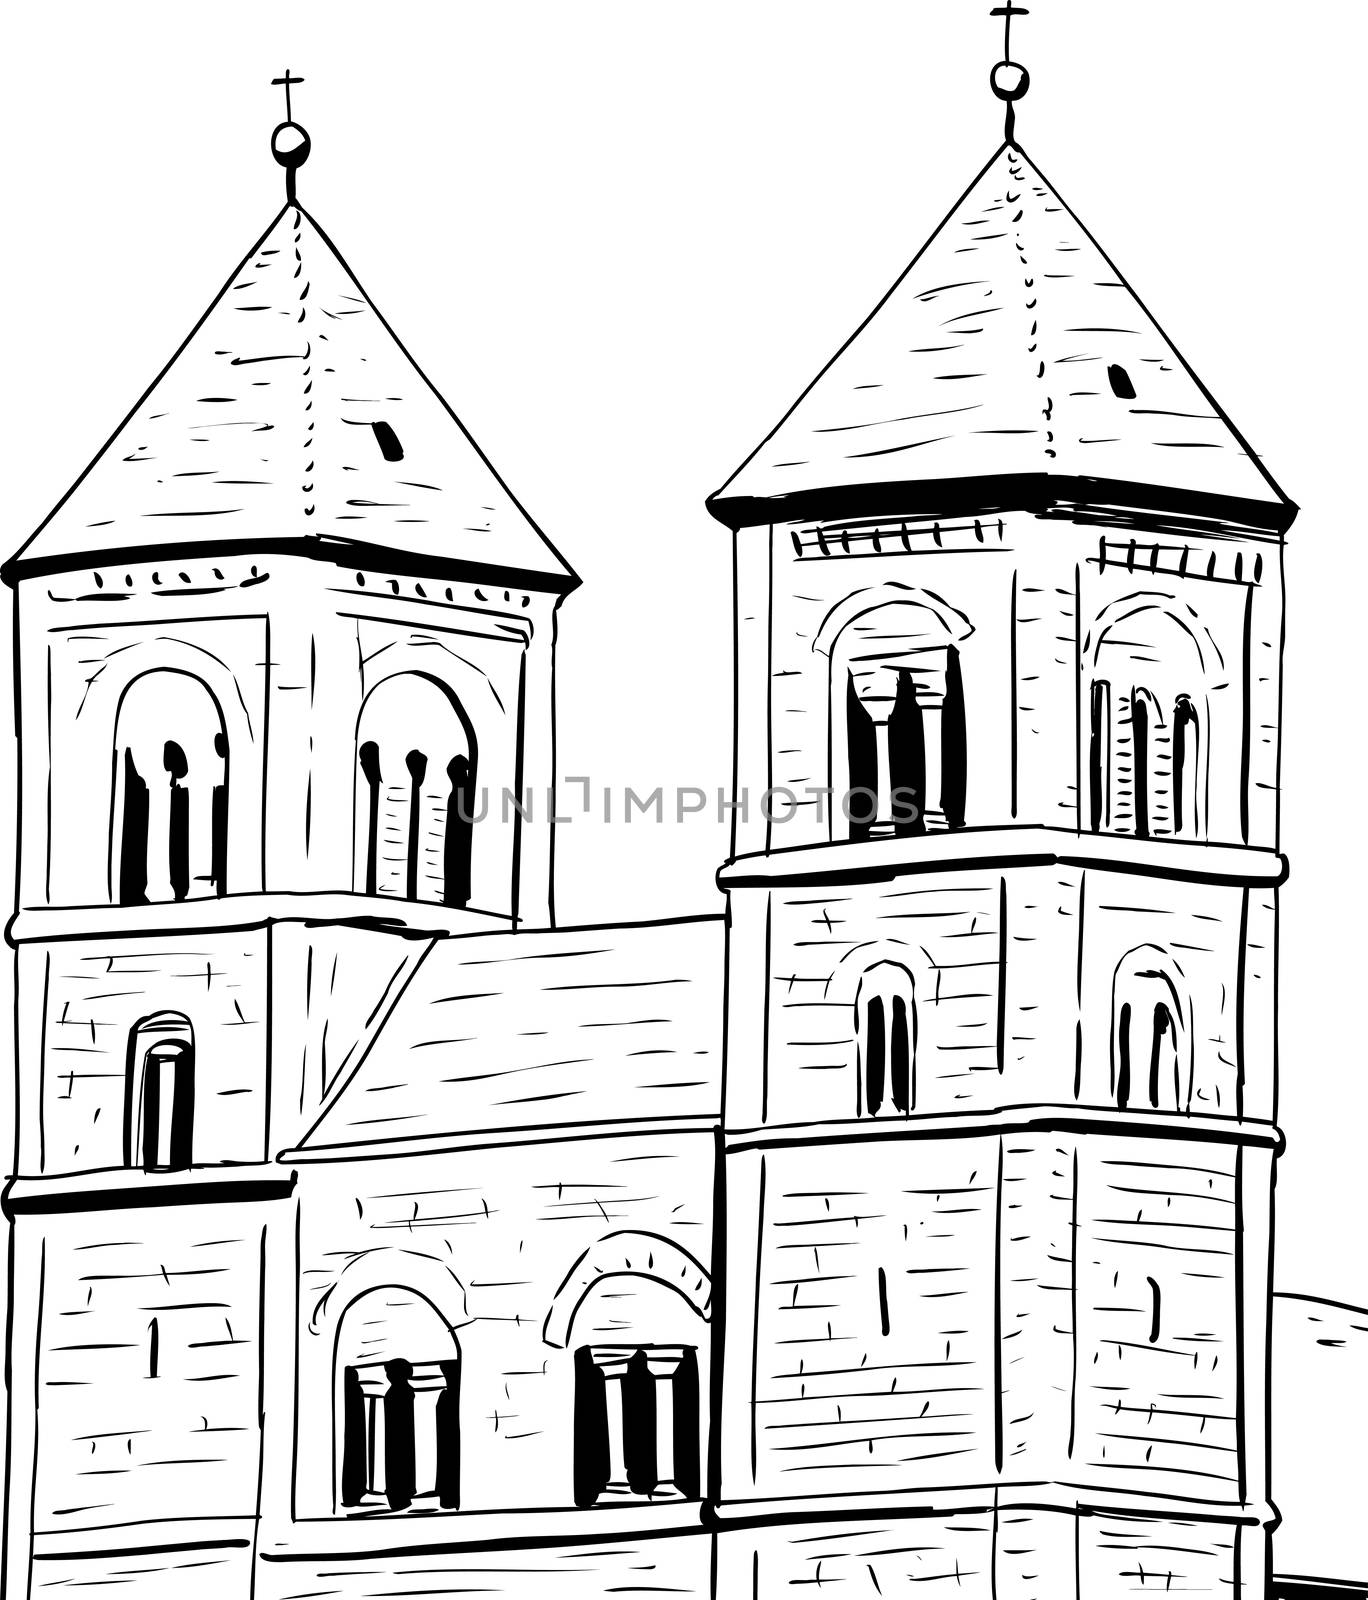 Outline sketch of towers on Quedlinburg Abbey in Germany